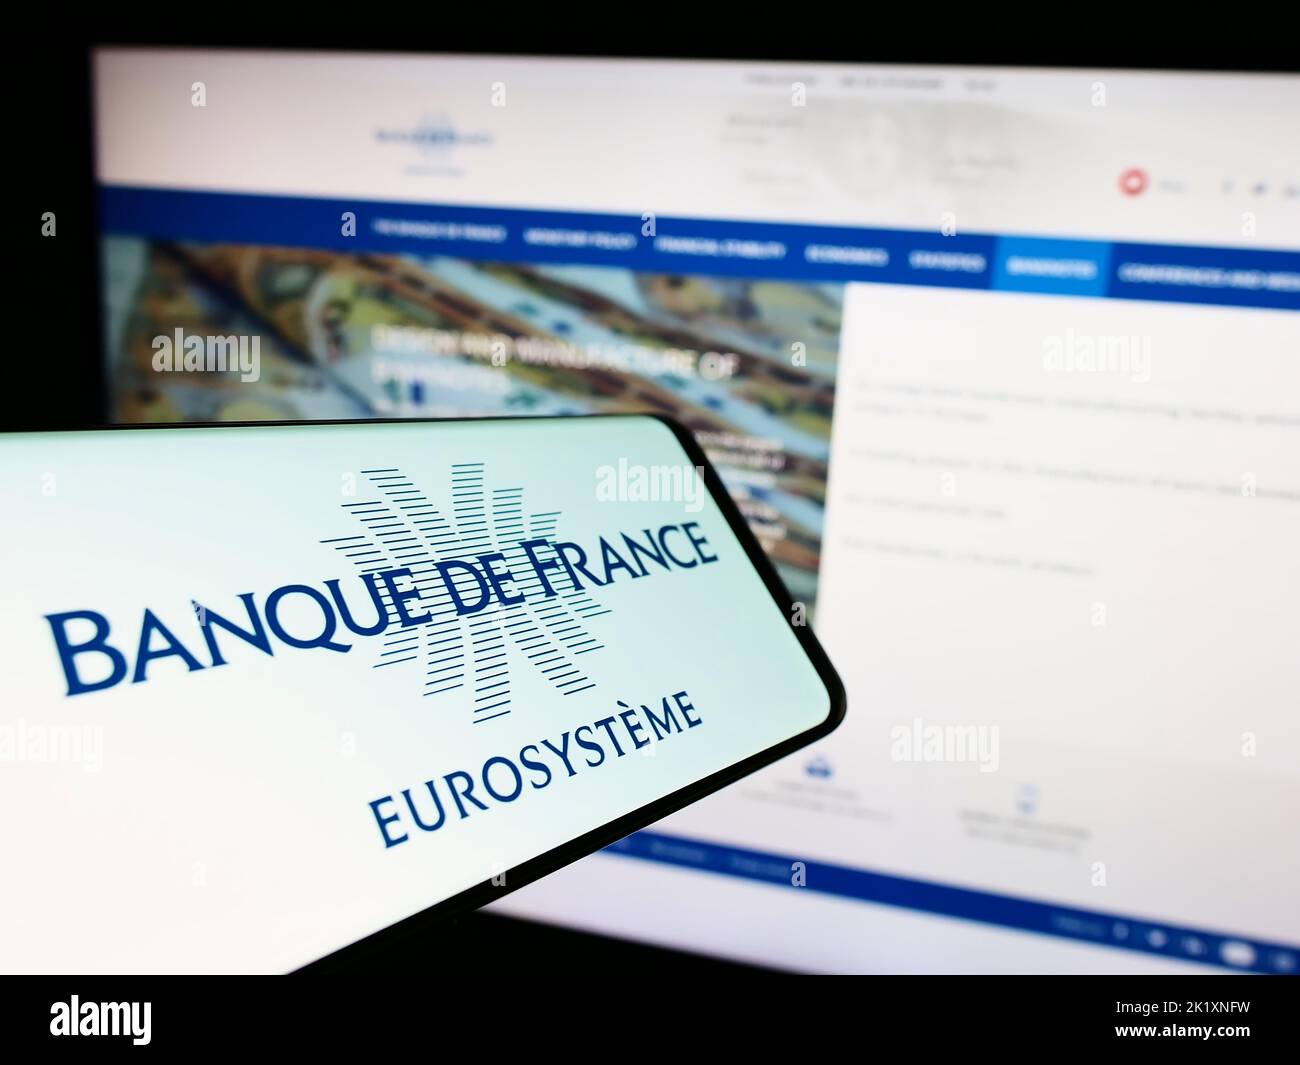 Smartphone with logo of French central bank Banque de France on screen in front of website. Focus on center-right of phone display. Stock Photo